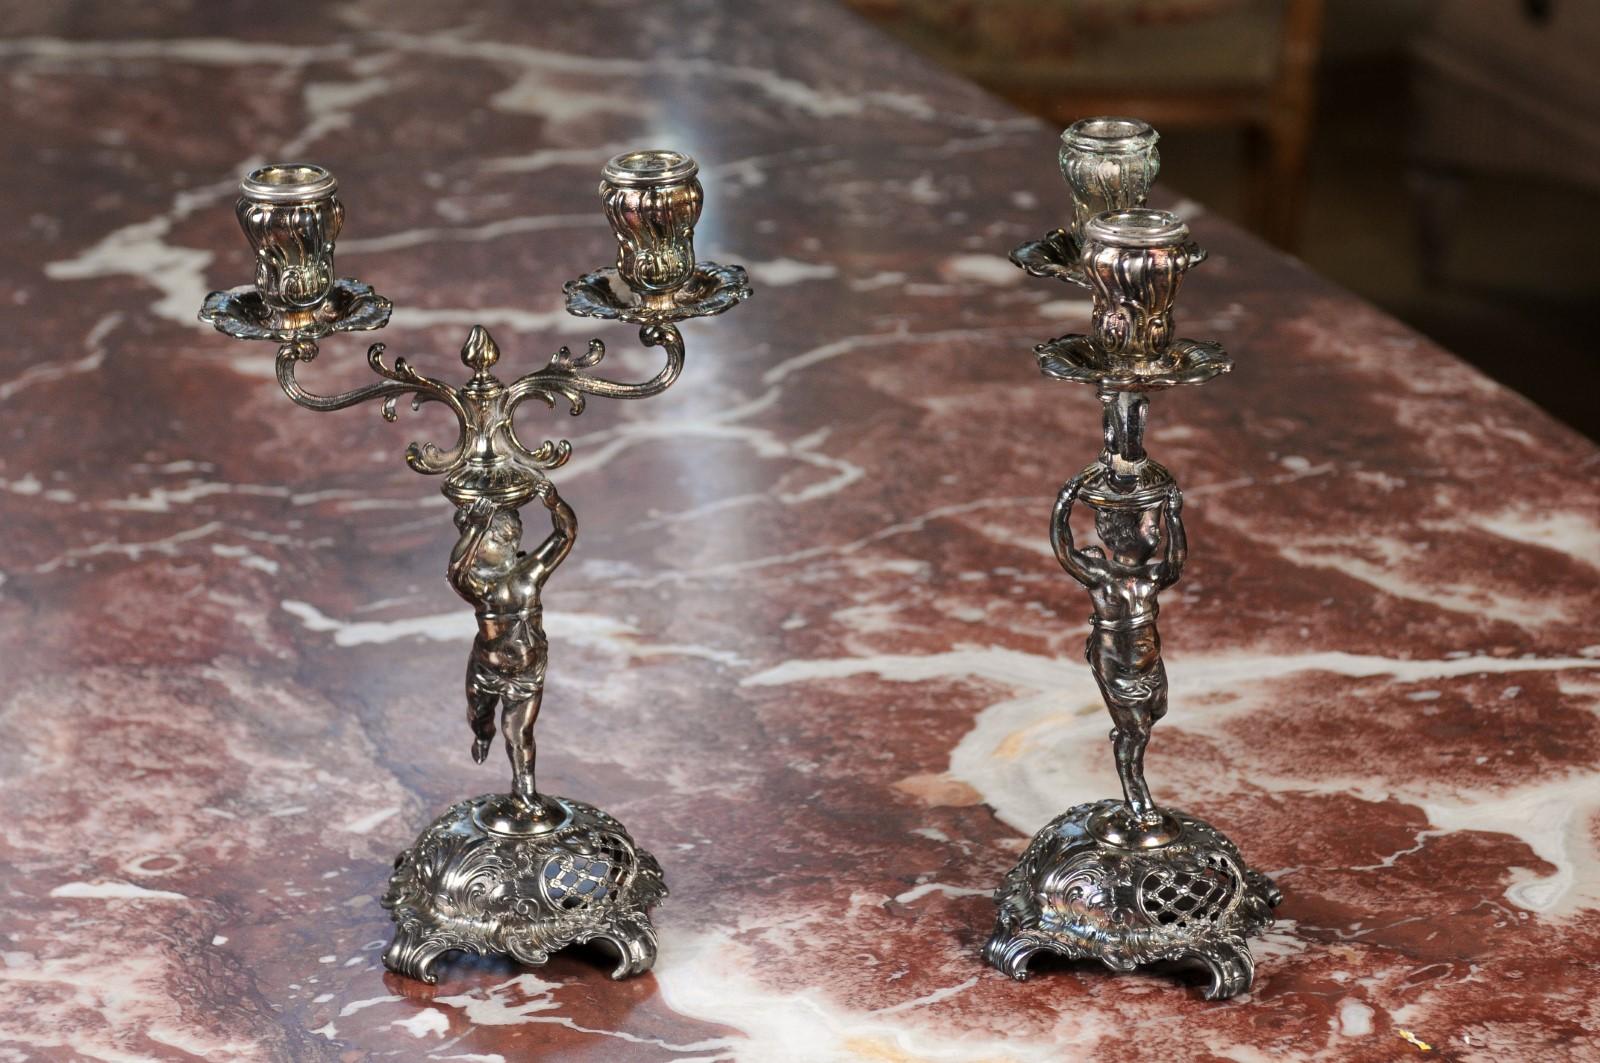 Pair of German Late 19th Century Jugendstil Silver Plated WMF Cherub Candelabras In Good Condition For Sale In Atlanta, GA